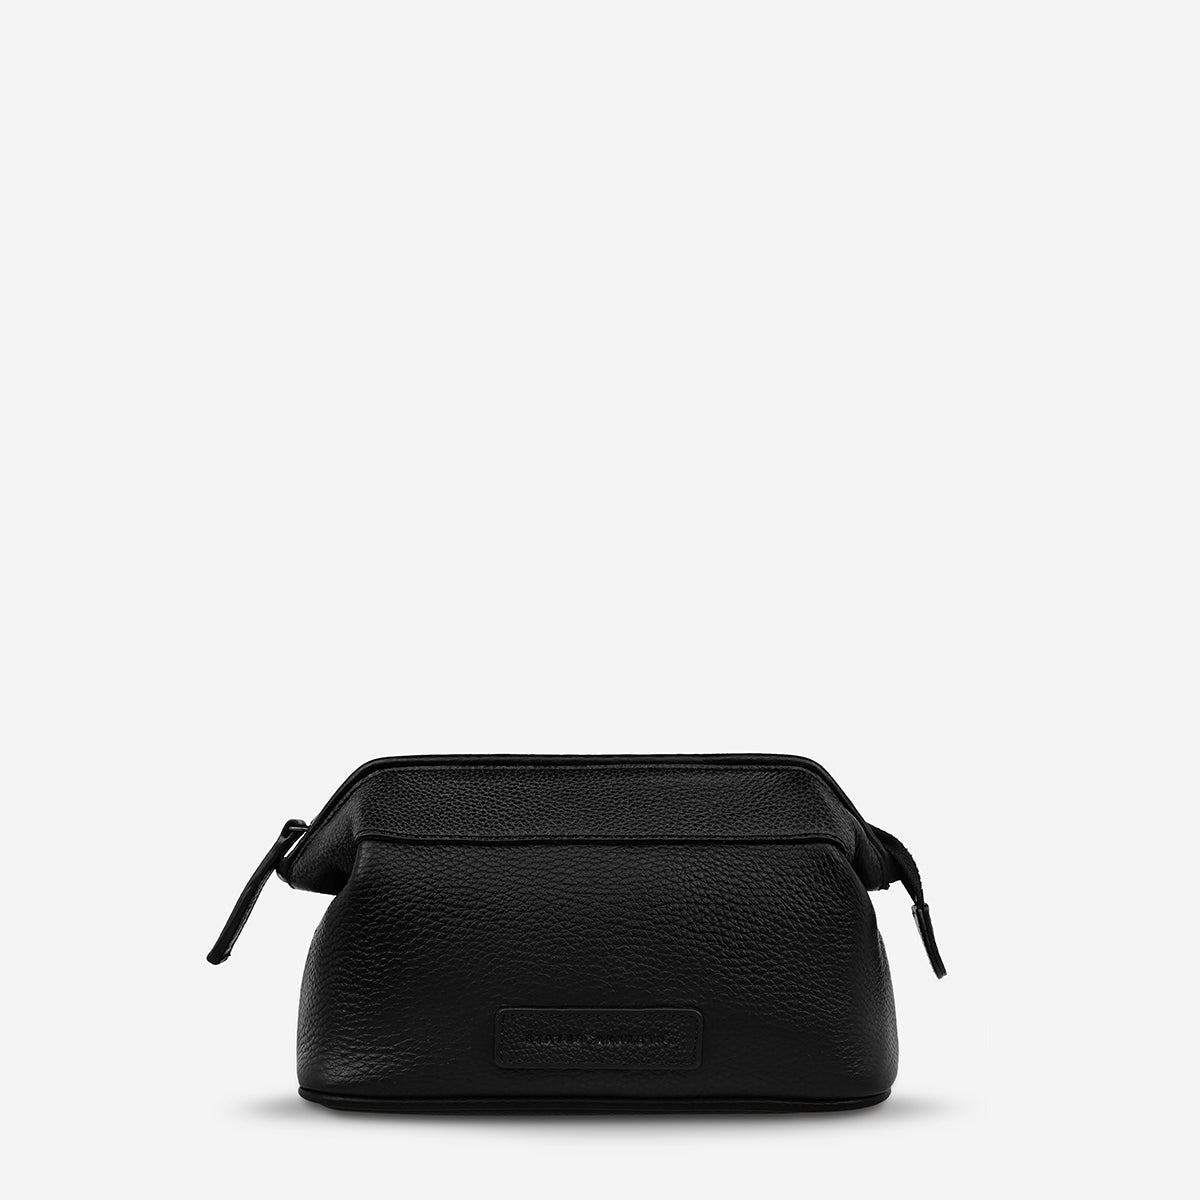 Thinking Of A Place Bag - Black